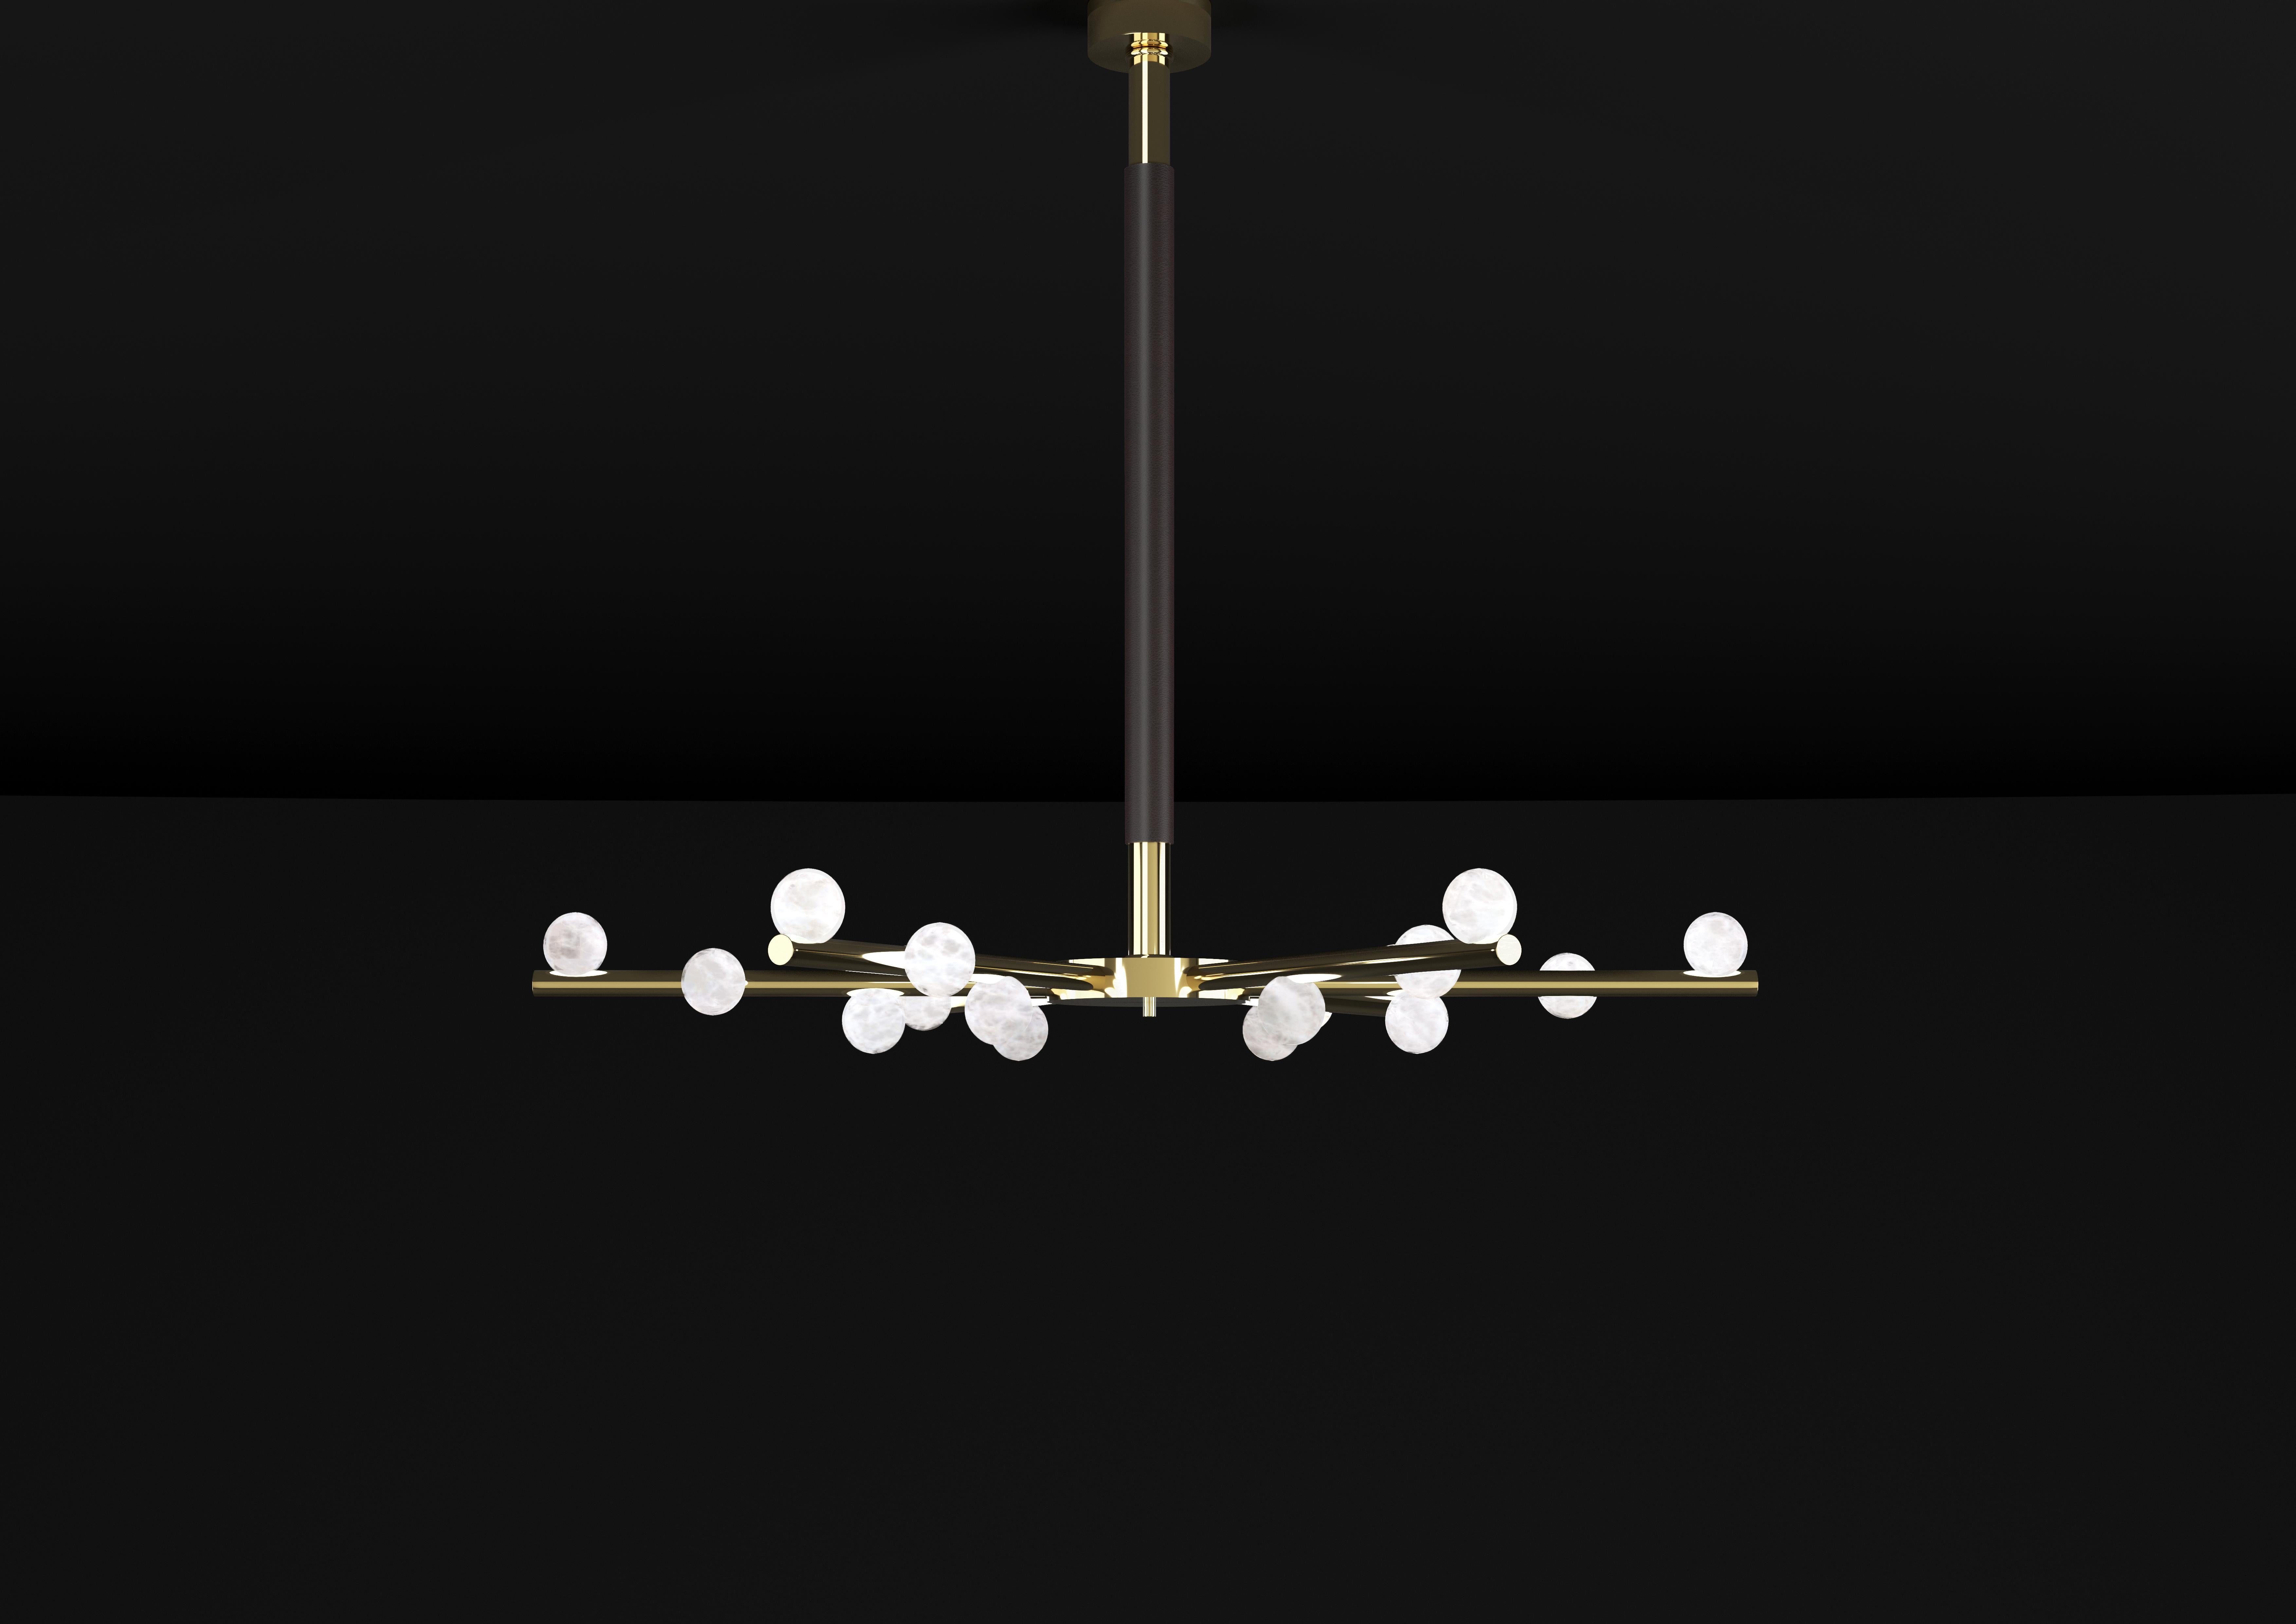 Demetra Shiny Gold Metal Chandelier by Alabastro Italiano
Dimensions: D 85 x W 97 x H 85 cm.
Materials: White alabaster, shiny gold metal and leather.

Available in different finishes: Shiny Silver, Bronze, Brushed Brass, Ruggine of Florence,